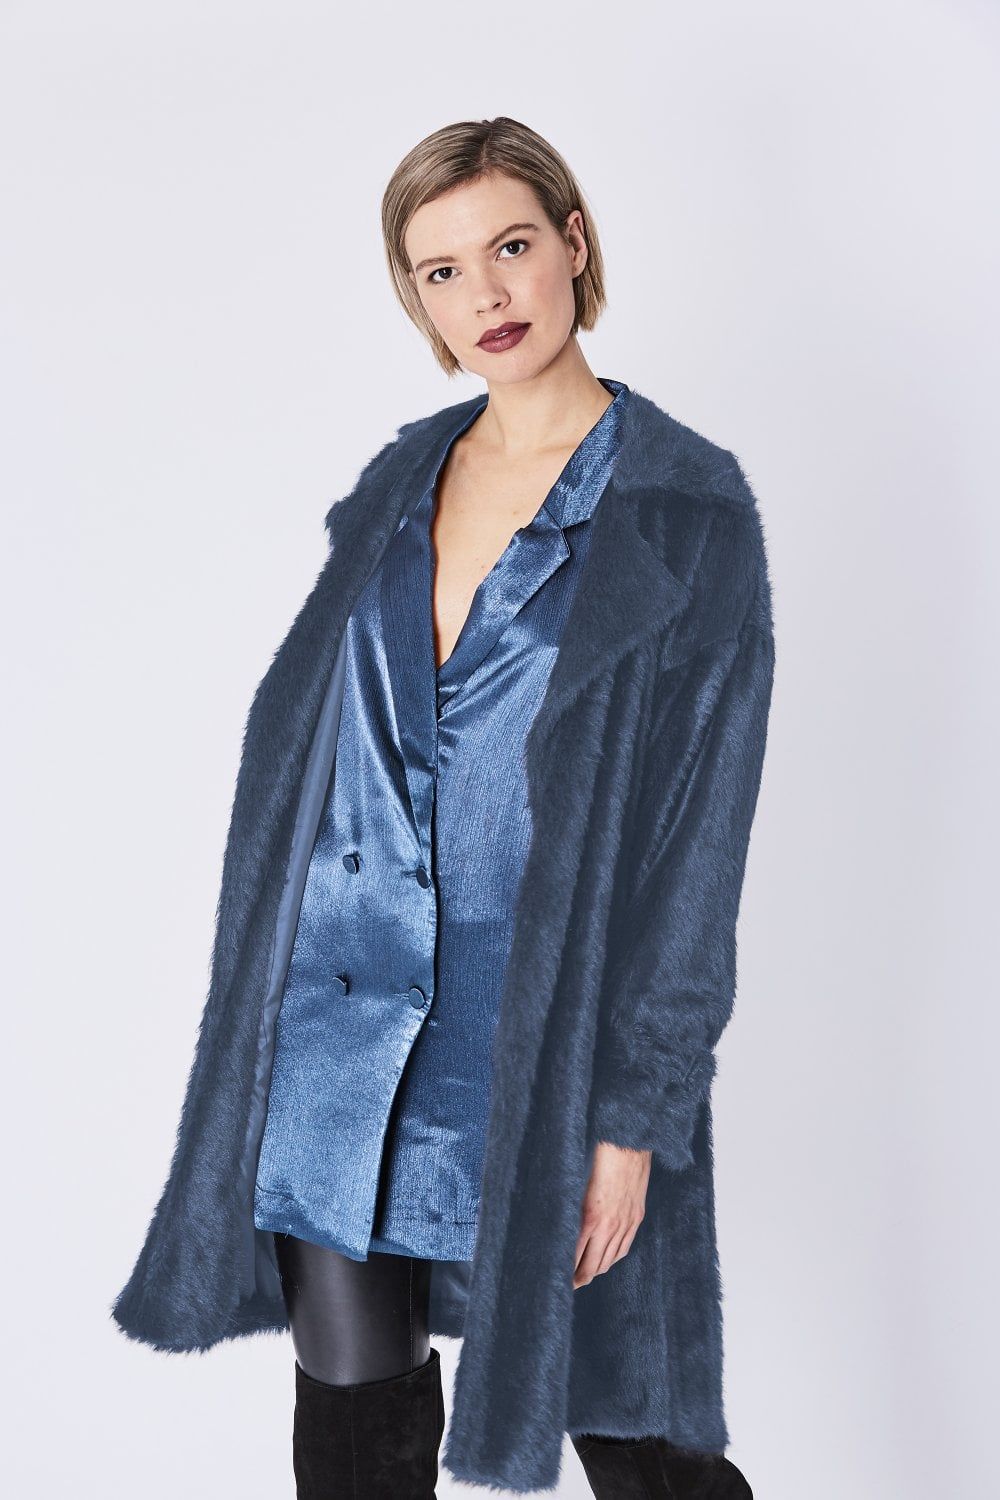 Luxury Faux Fur Coat

15% Acrylic
85% Modacrylic

Lining: 100% Polyester

One Size
Comfortably fits sizes 8 - 14 UK

Add a touch of elegance to your winter wardrobe with this luxurious faux fur coat with a belted waist. An incredibly soft to touch fluffy piece that features double-breasted lapels and a buckle belt. A classic faux fur coat that is essential to your everyday wardrobe.